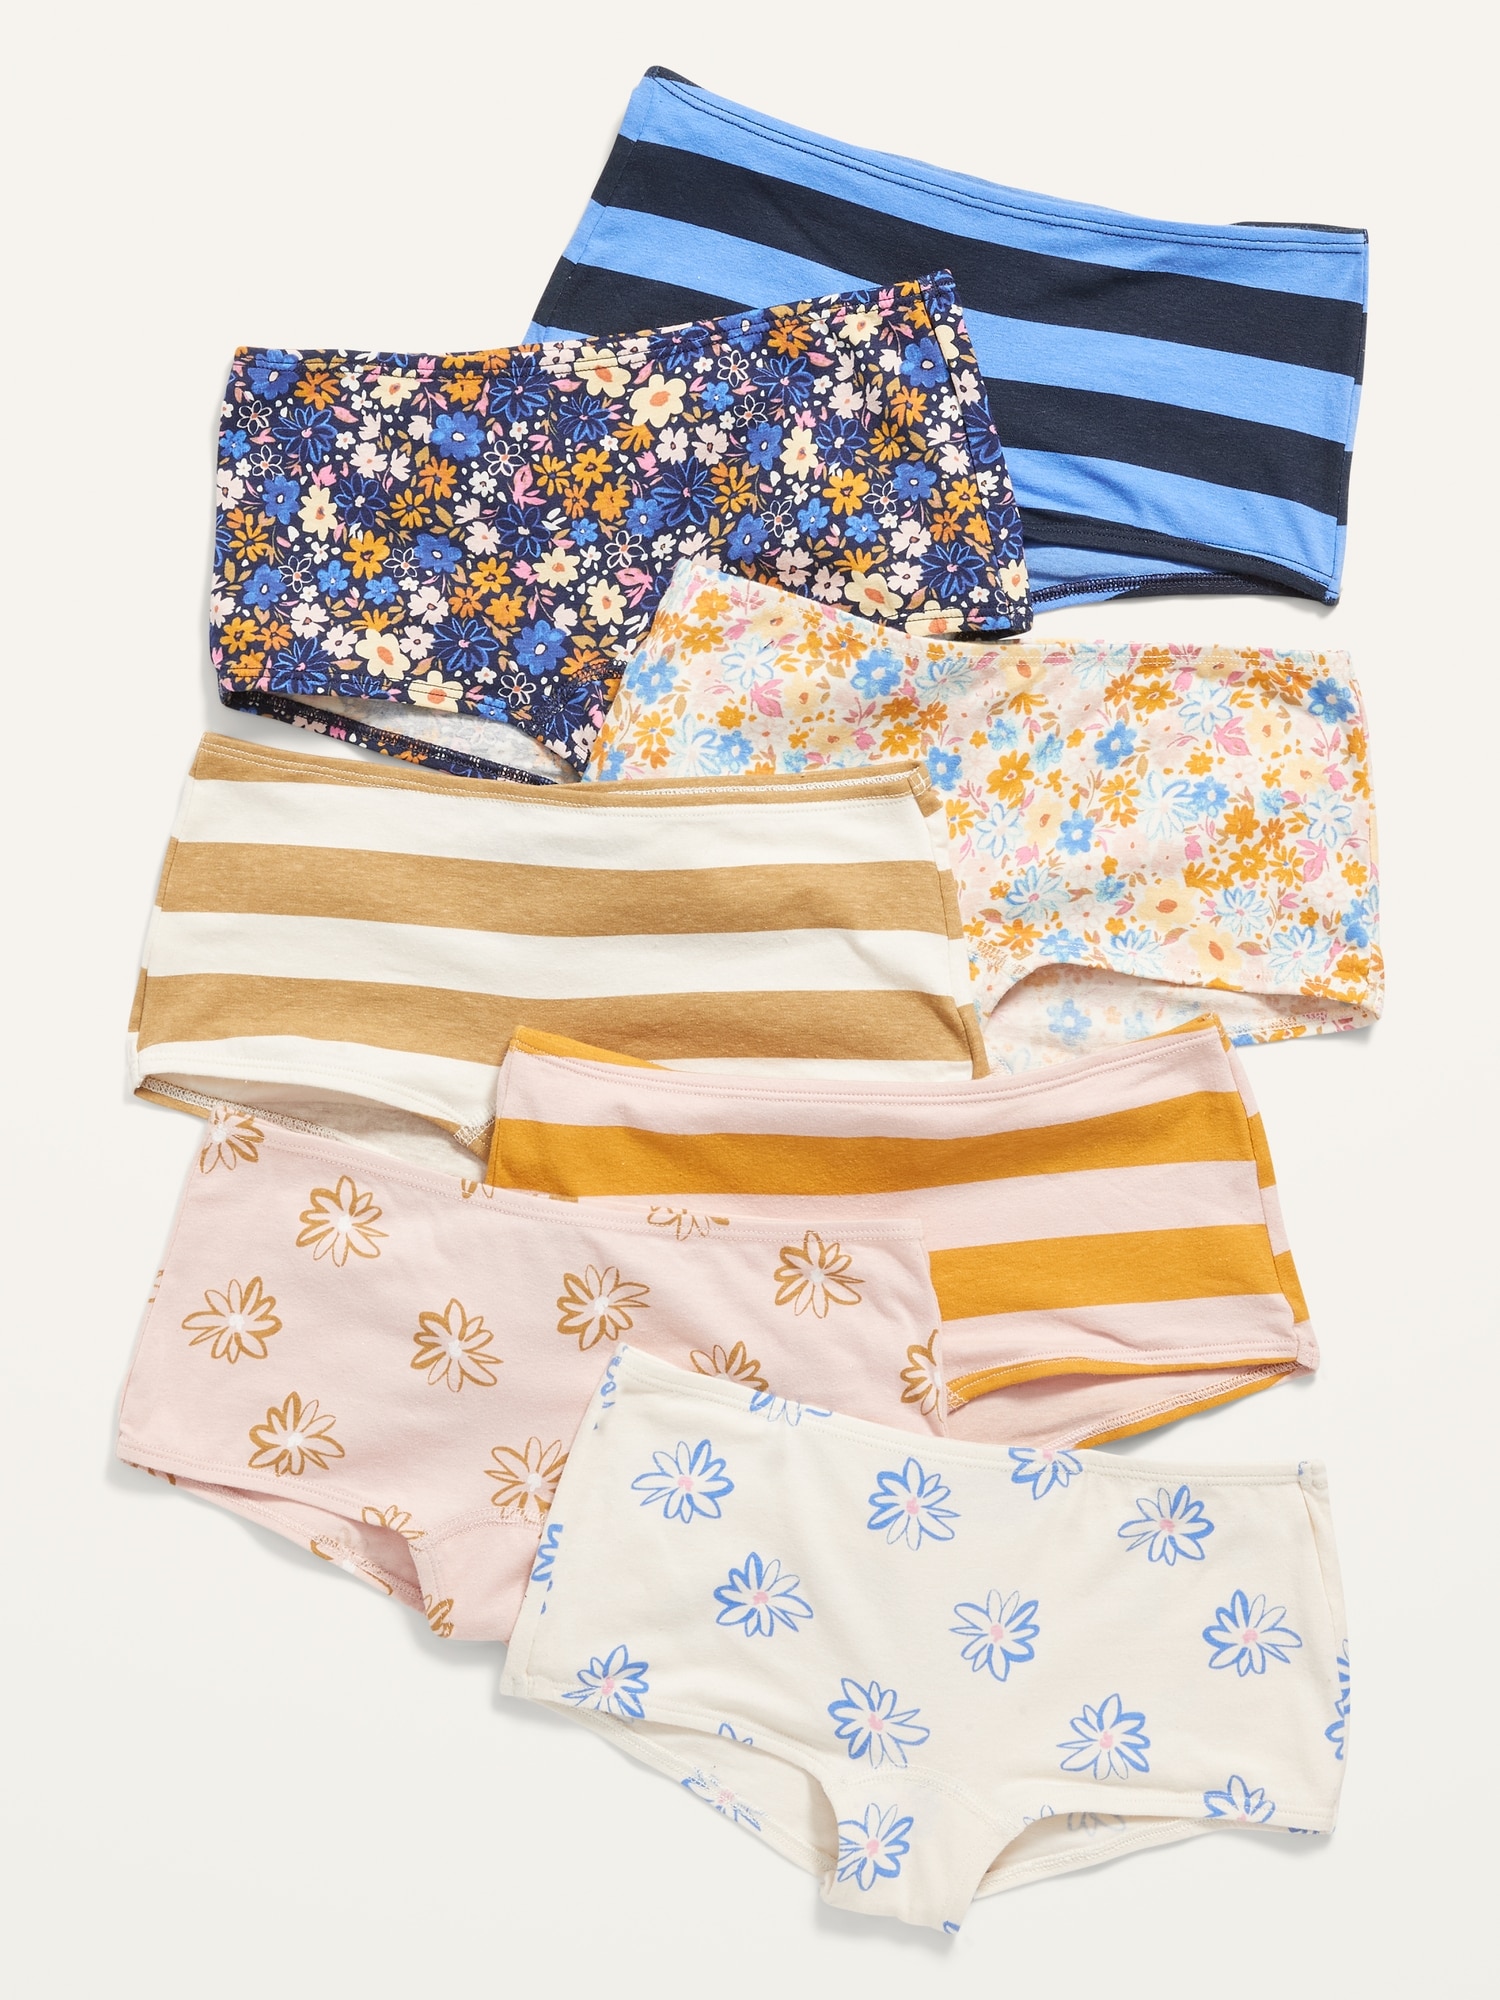 Old Navy Boys'horts Underwear 7-Pack for Girls